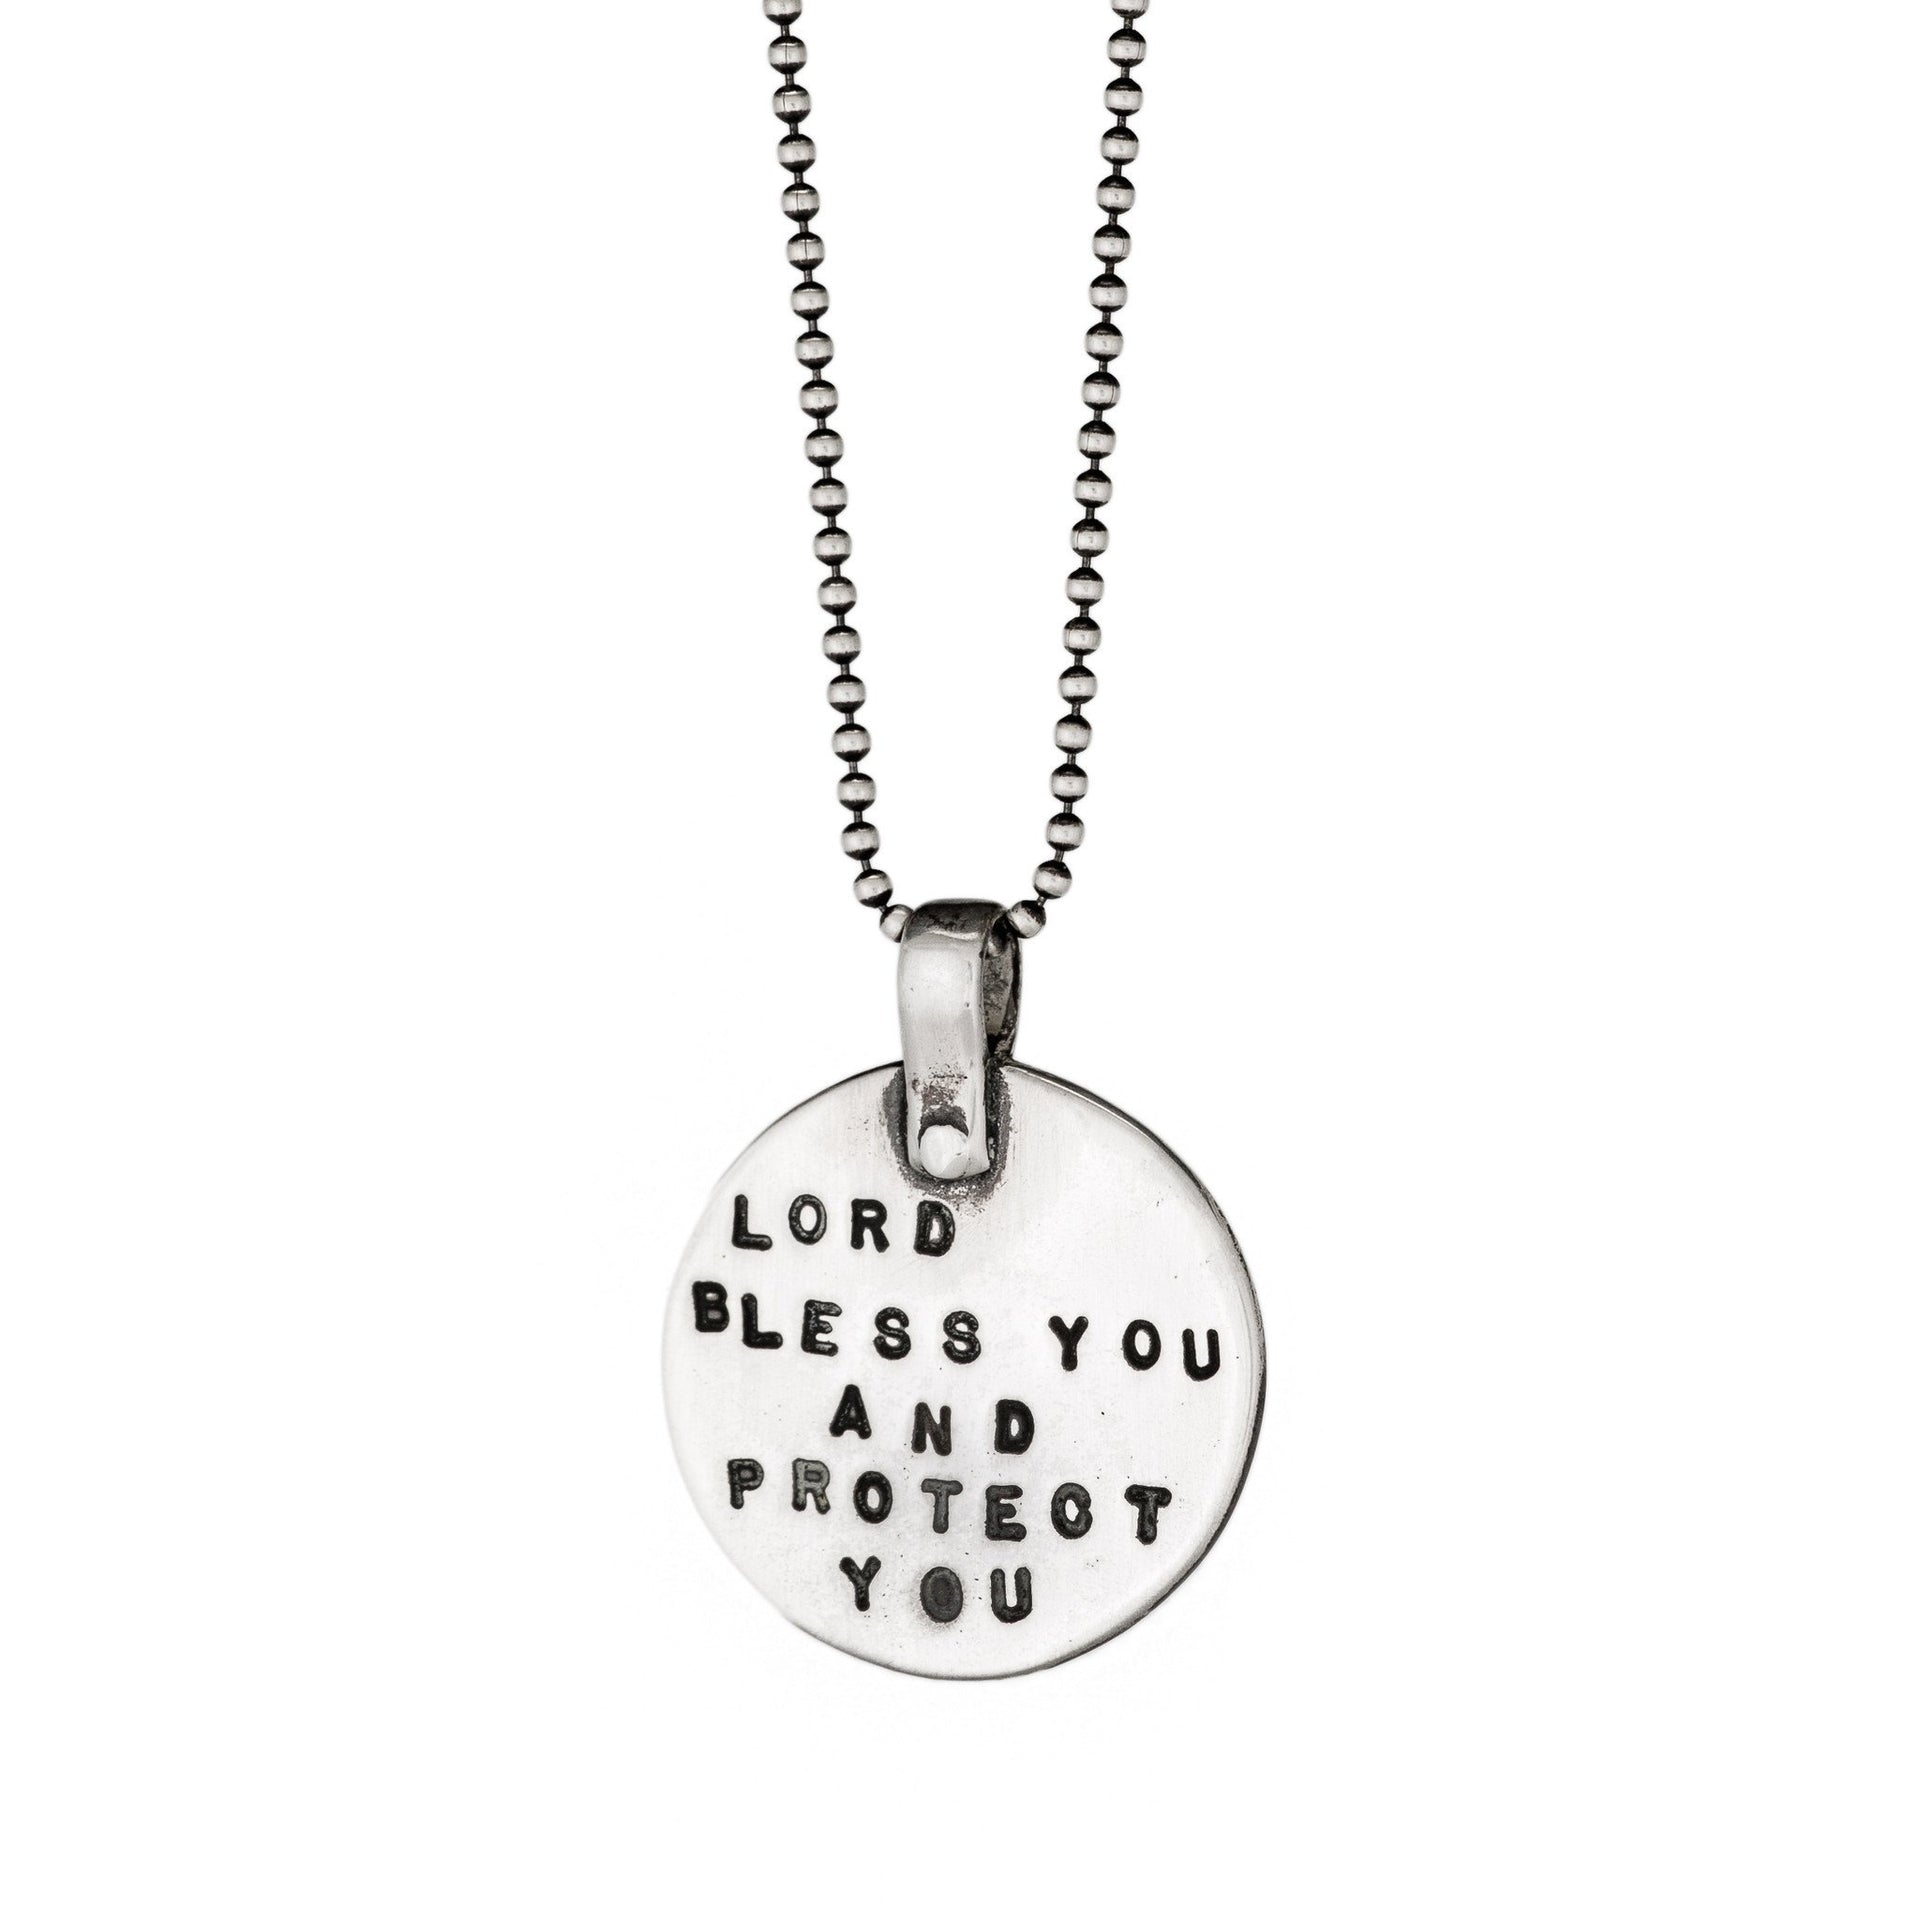 Marla Studio Necklaces Silver / Chain / 16" Lord Bless You and Protect You Necklace by Marla Studio - Silver or Bronze